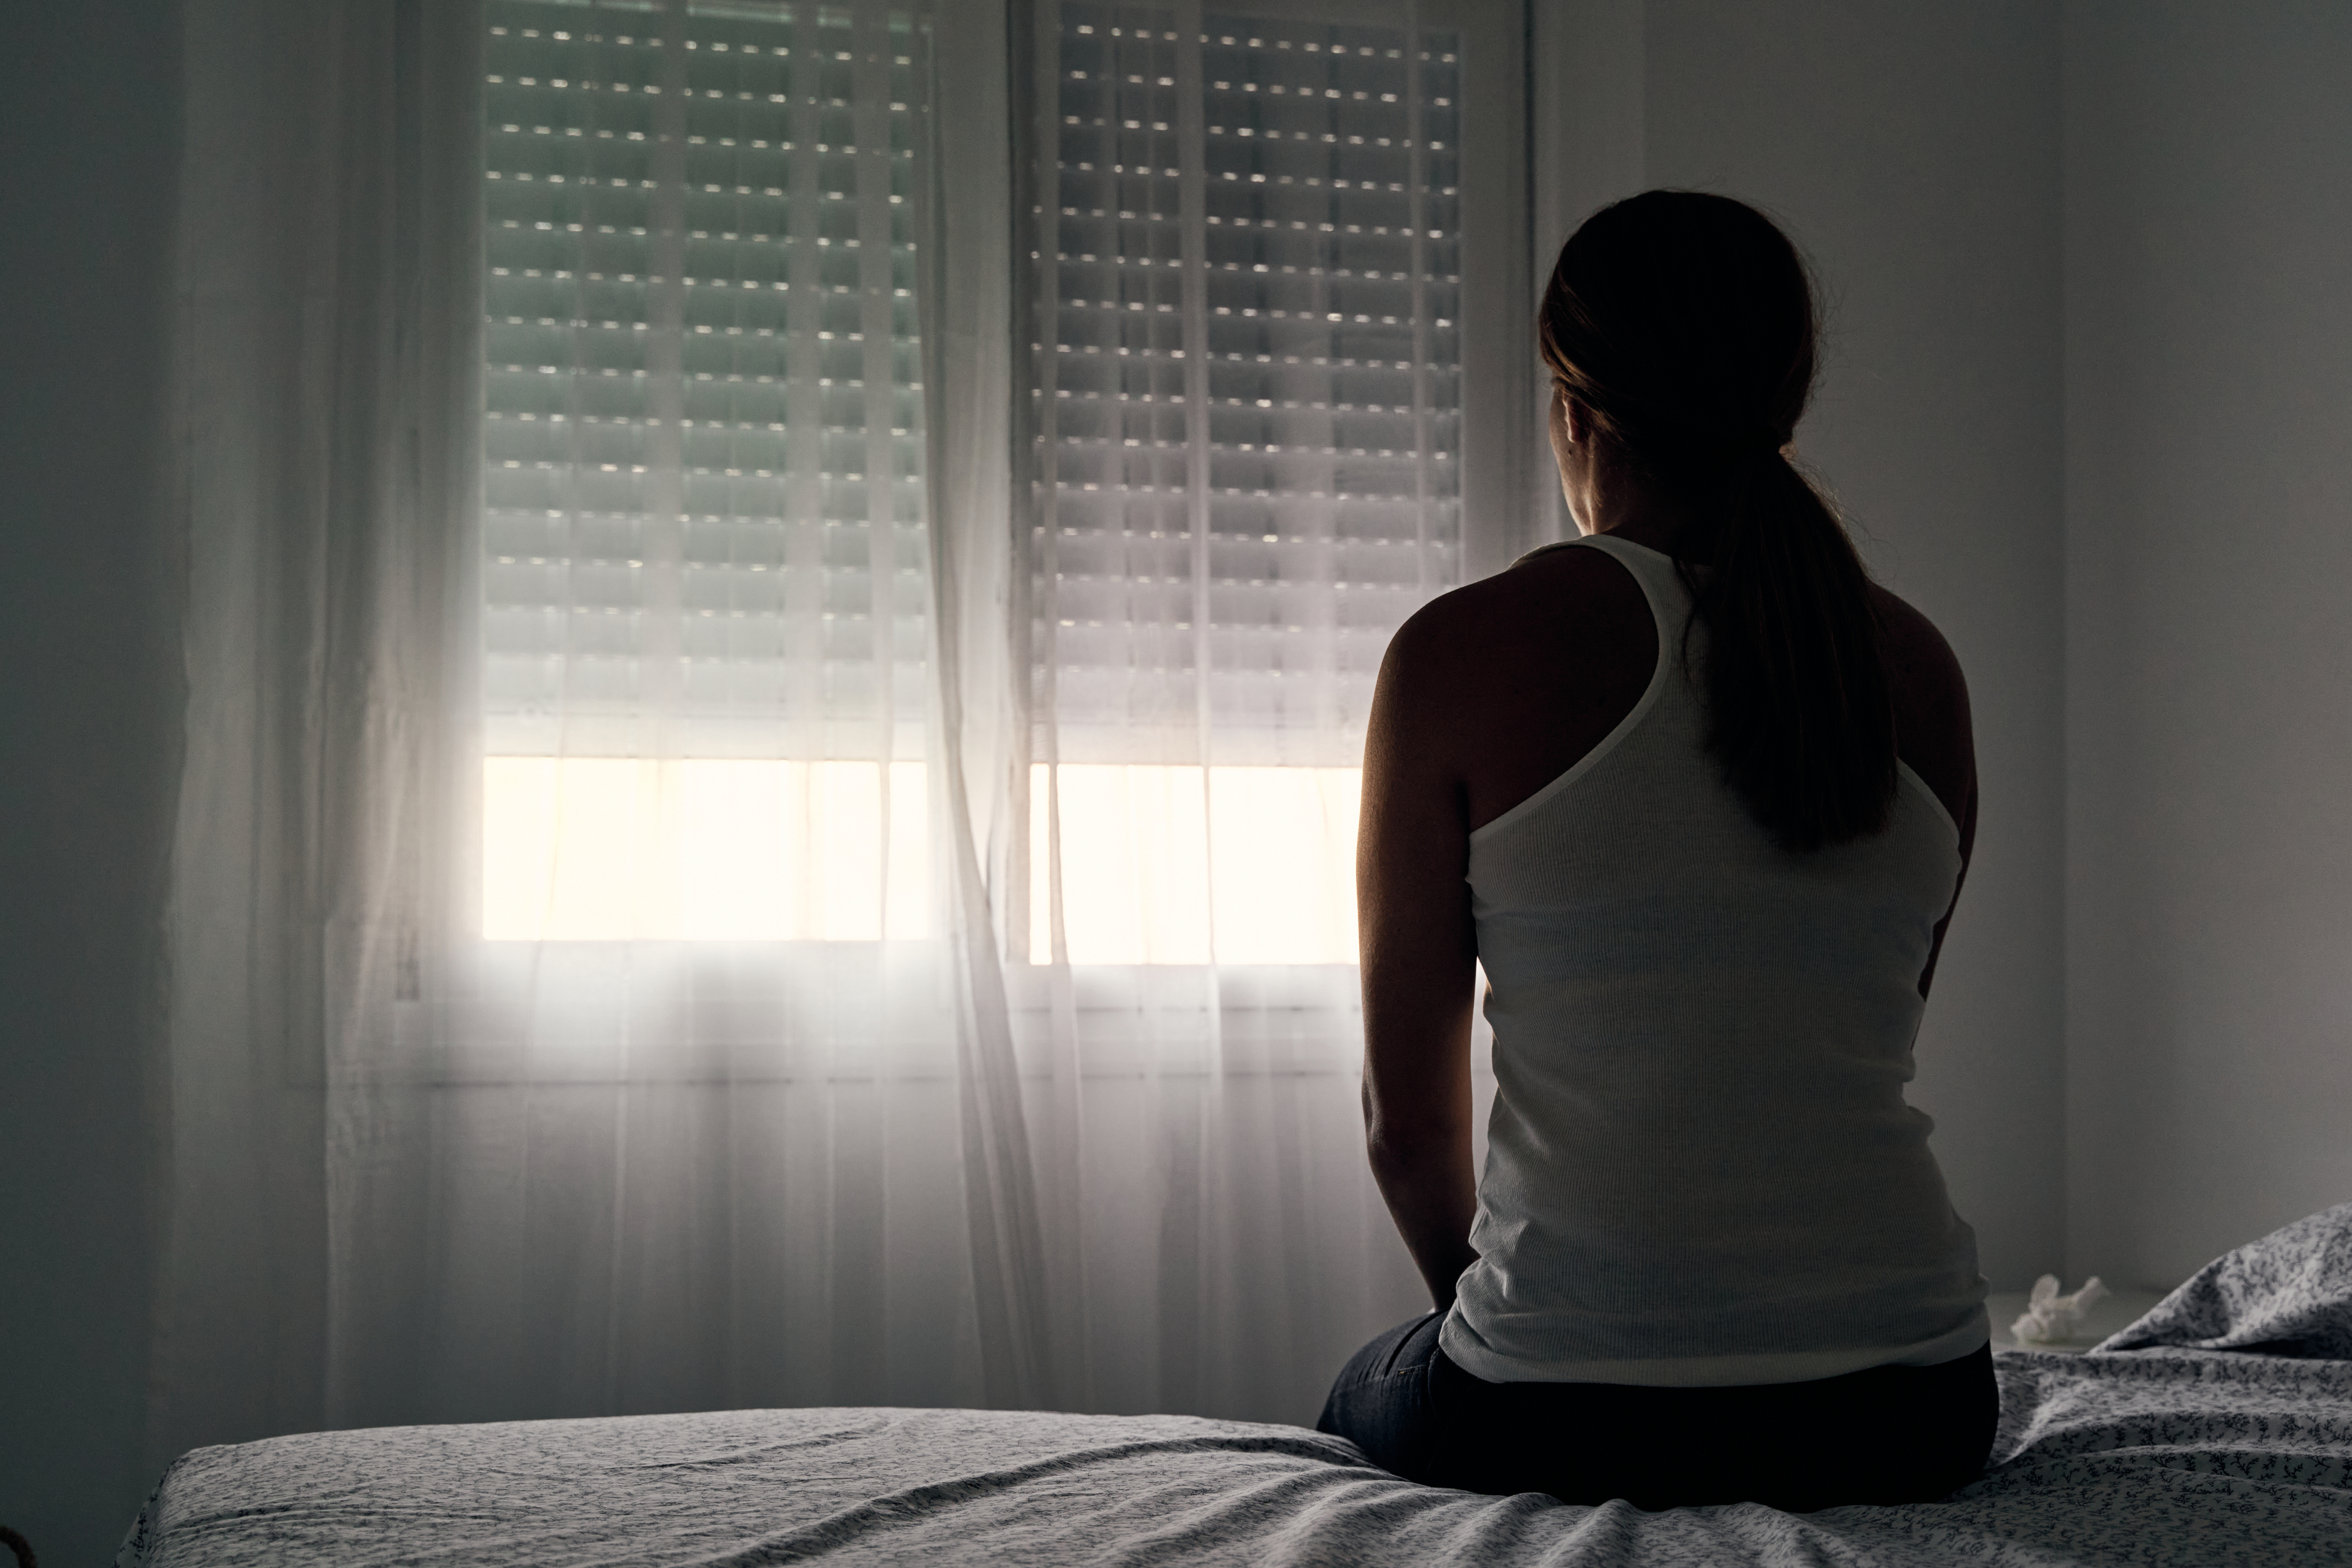 Woman sitting on a bed facing a window with closed shutters, room appears dimly lit